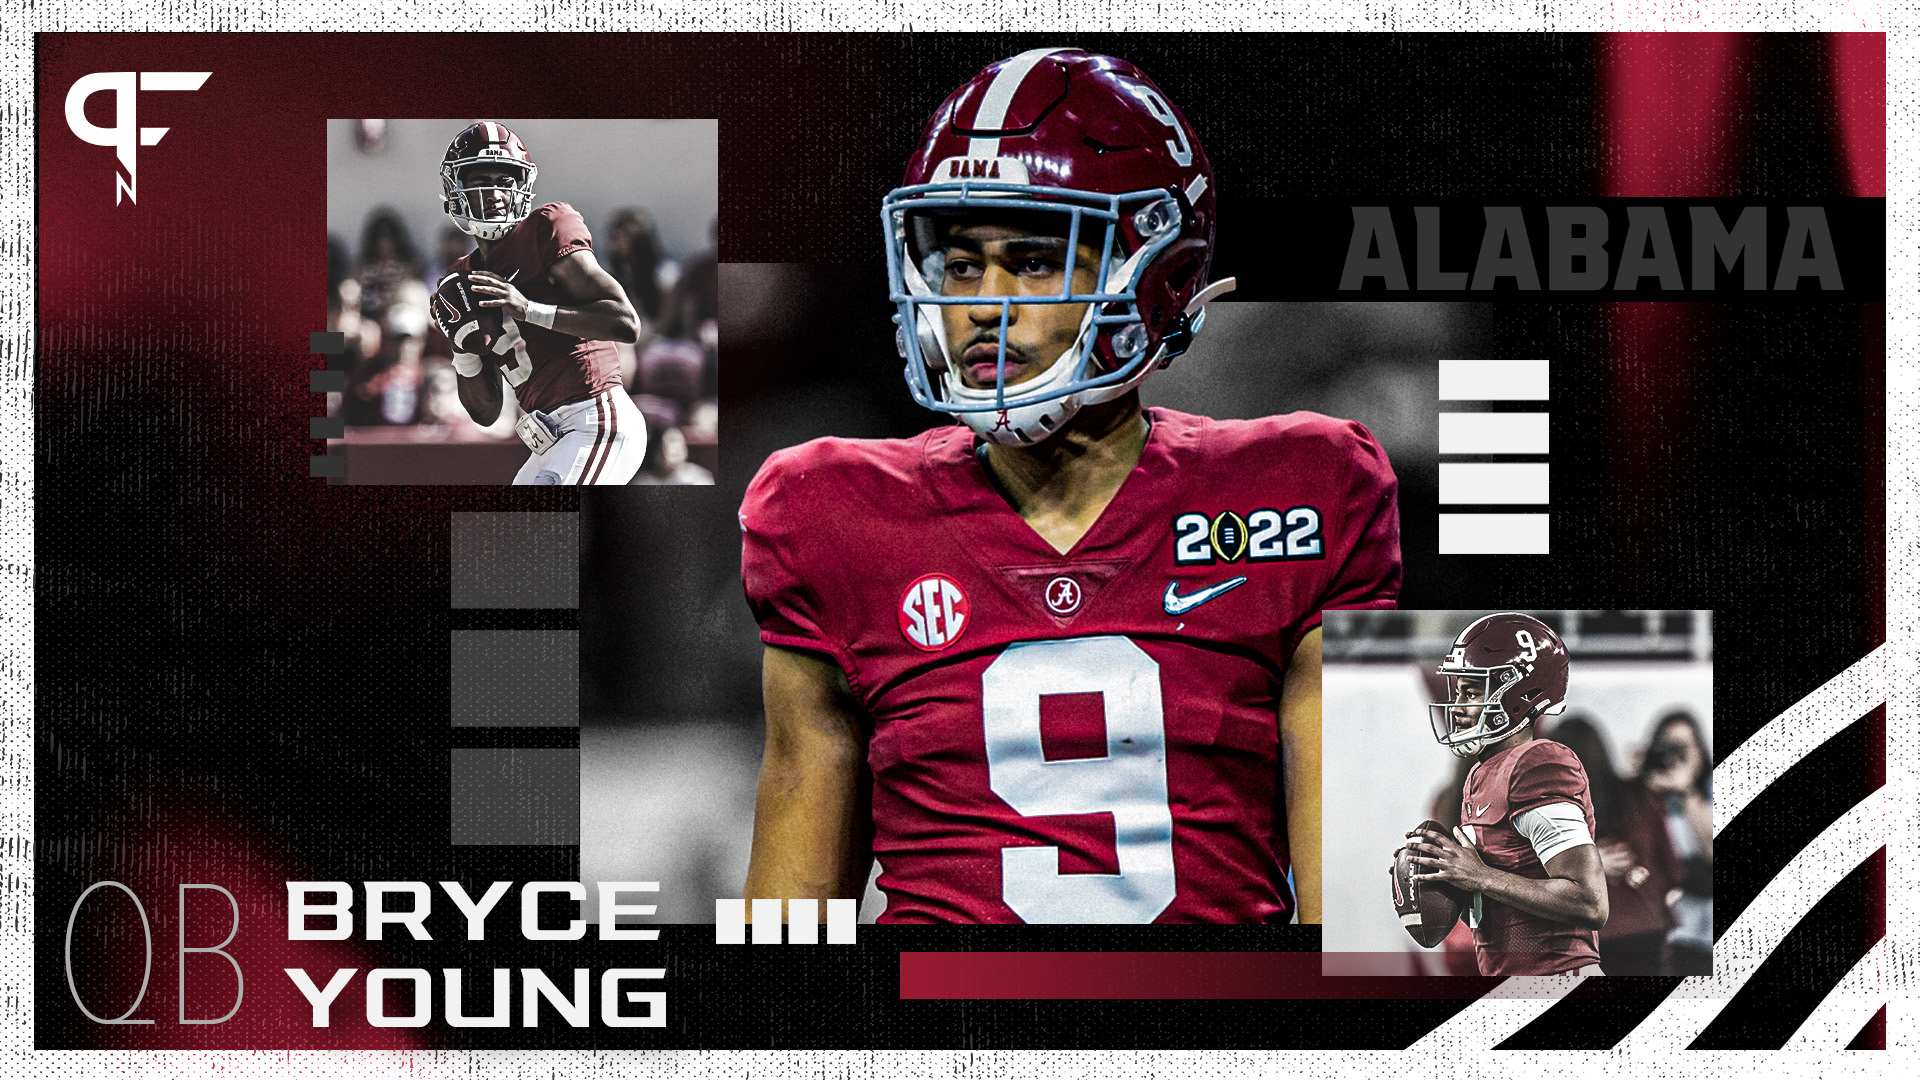 What if Bryce Young played basketball instead of football? 